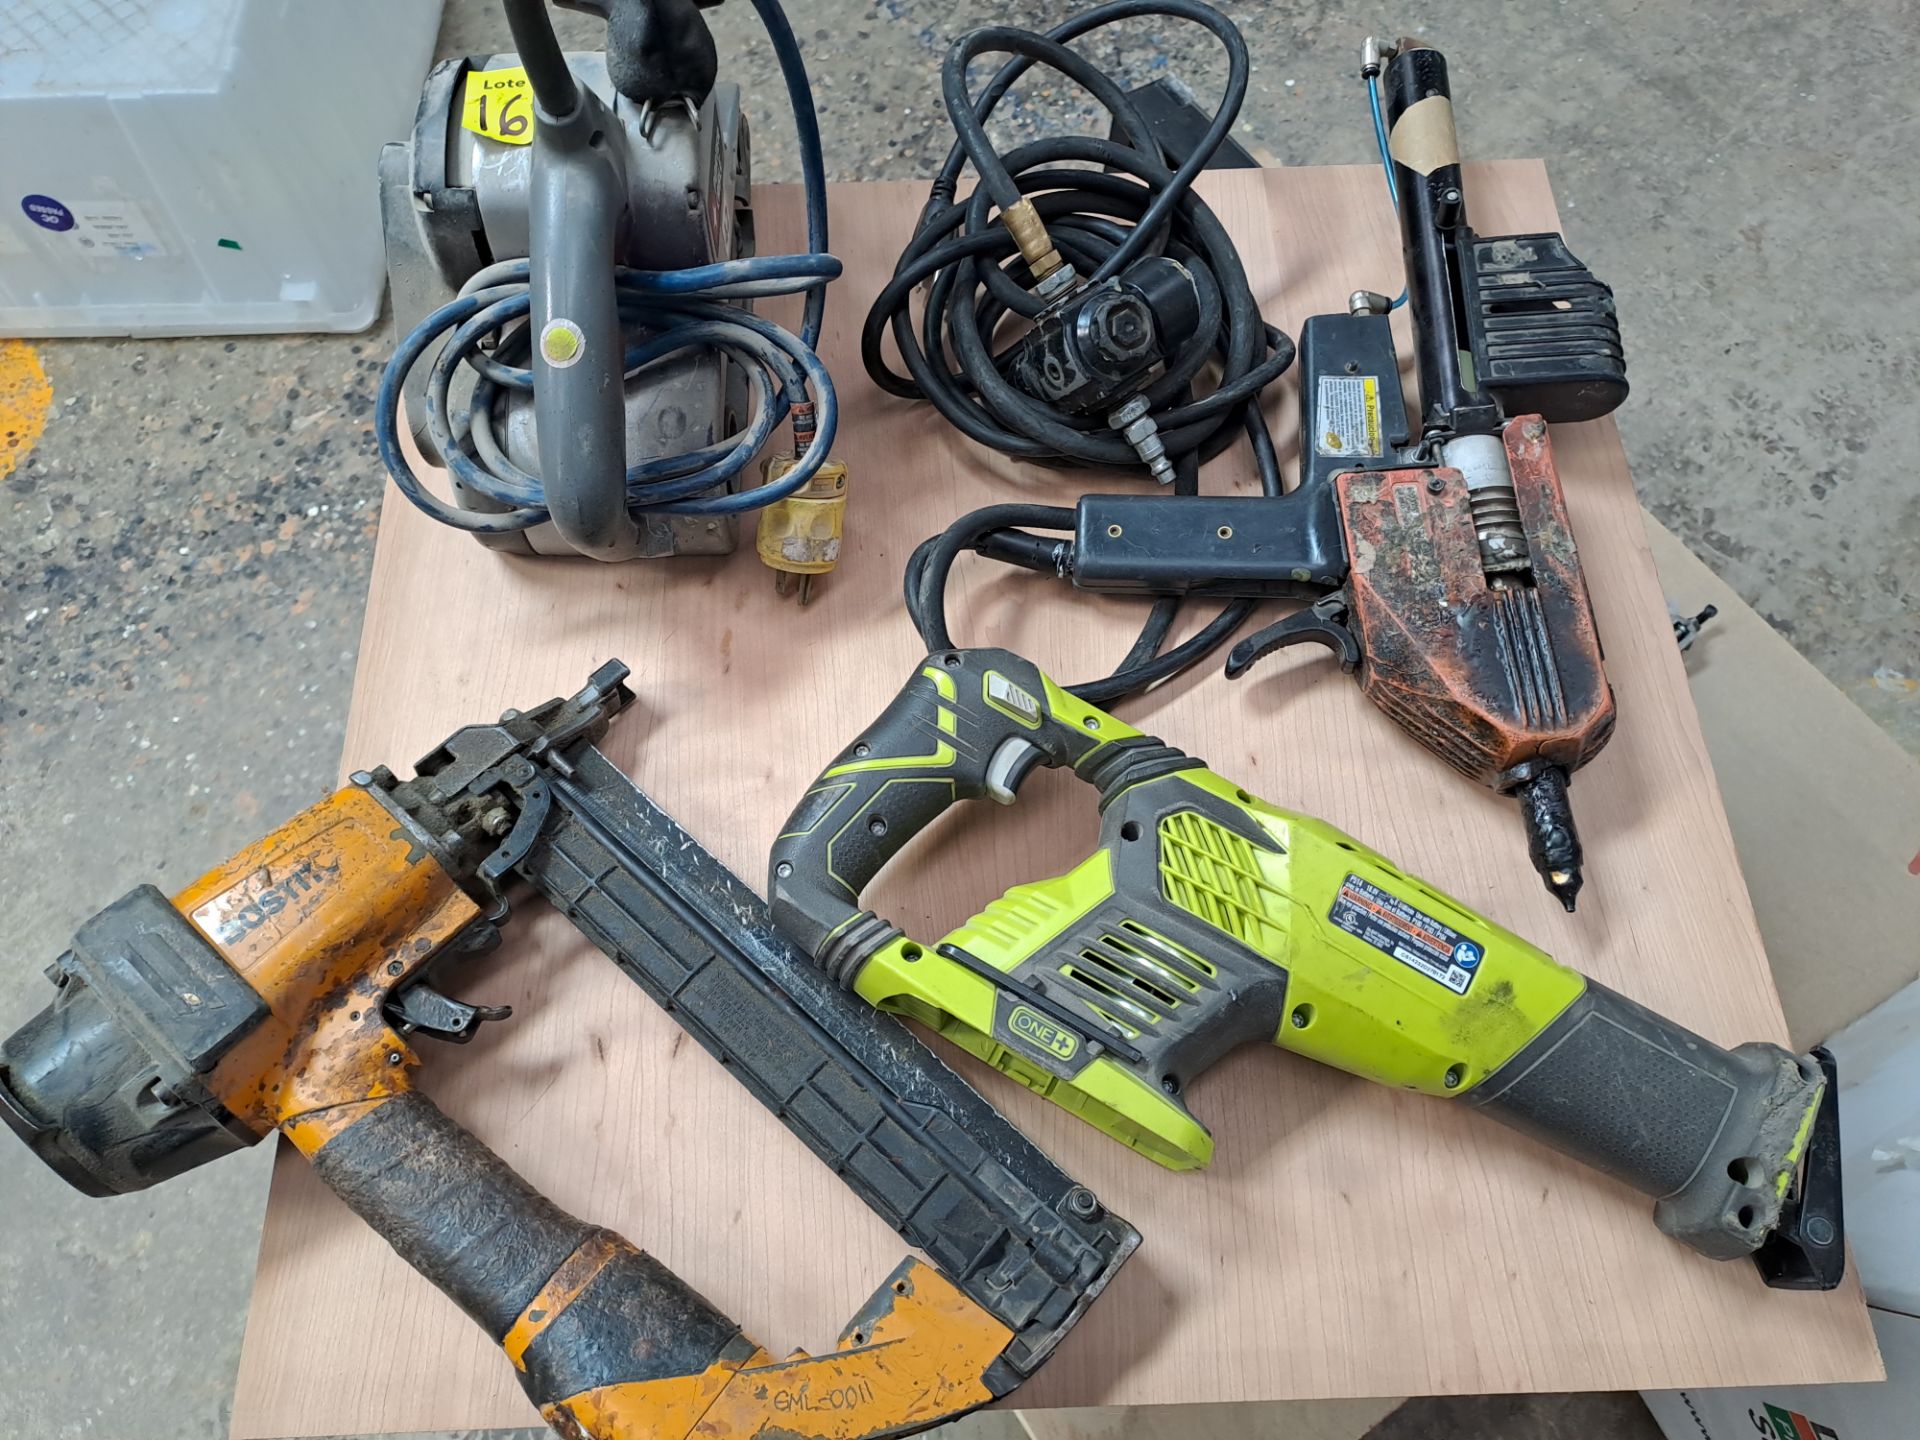 Lot of 4 pieces contains: 1 Porter electric sander with dust collector; 1 Ryobi wood saw without ba - Image 5 of 14